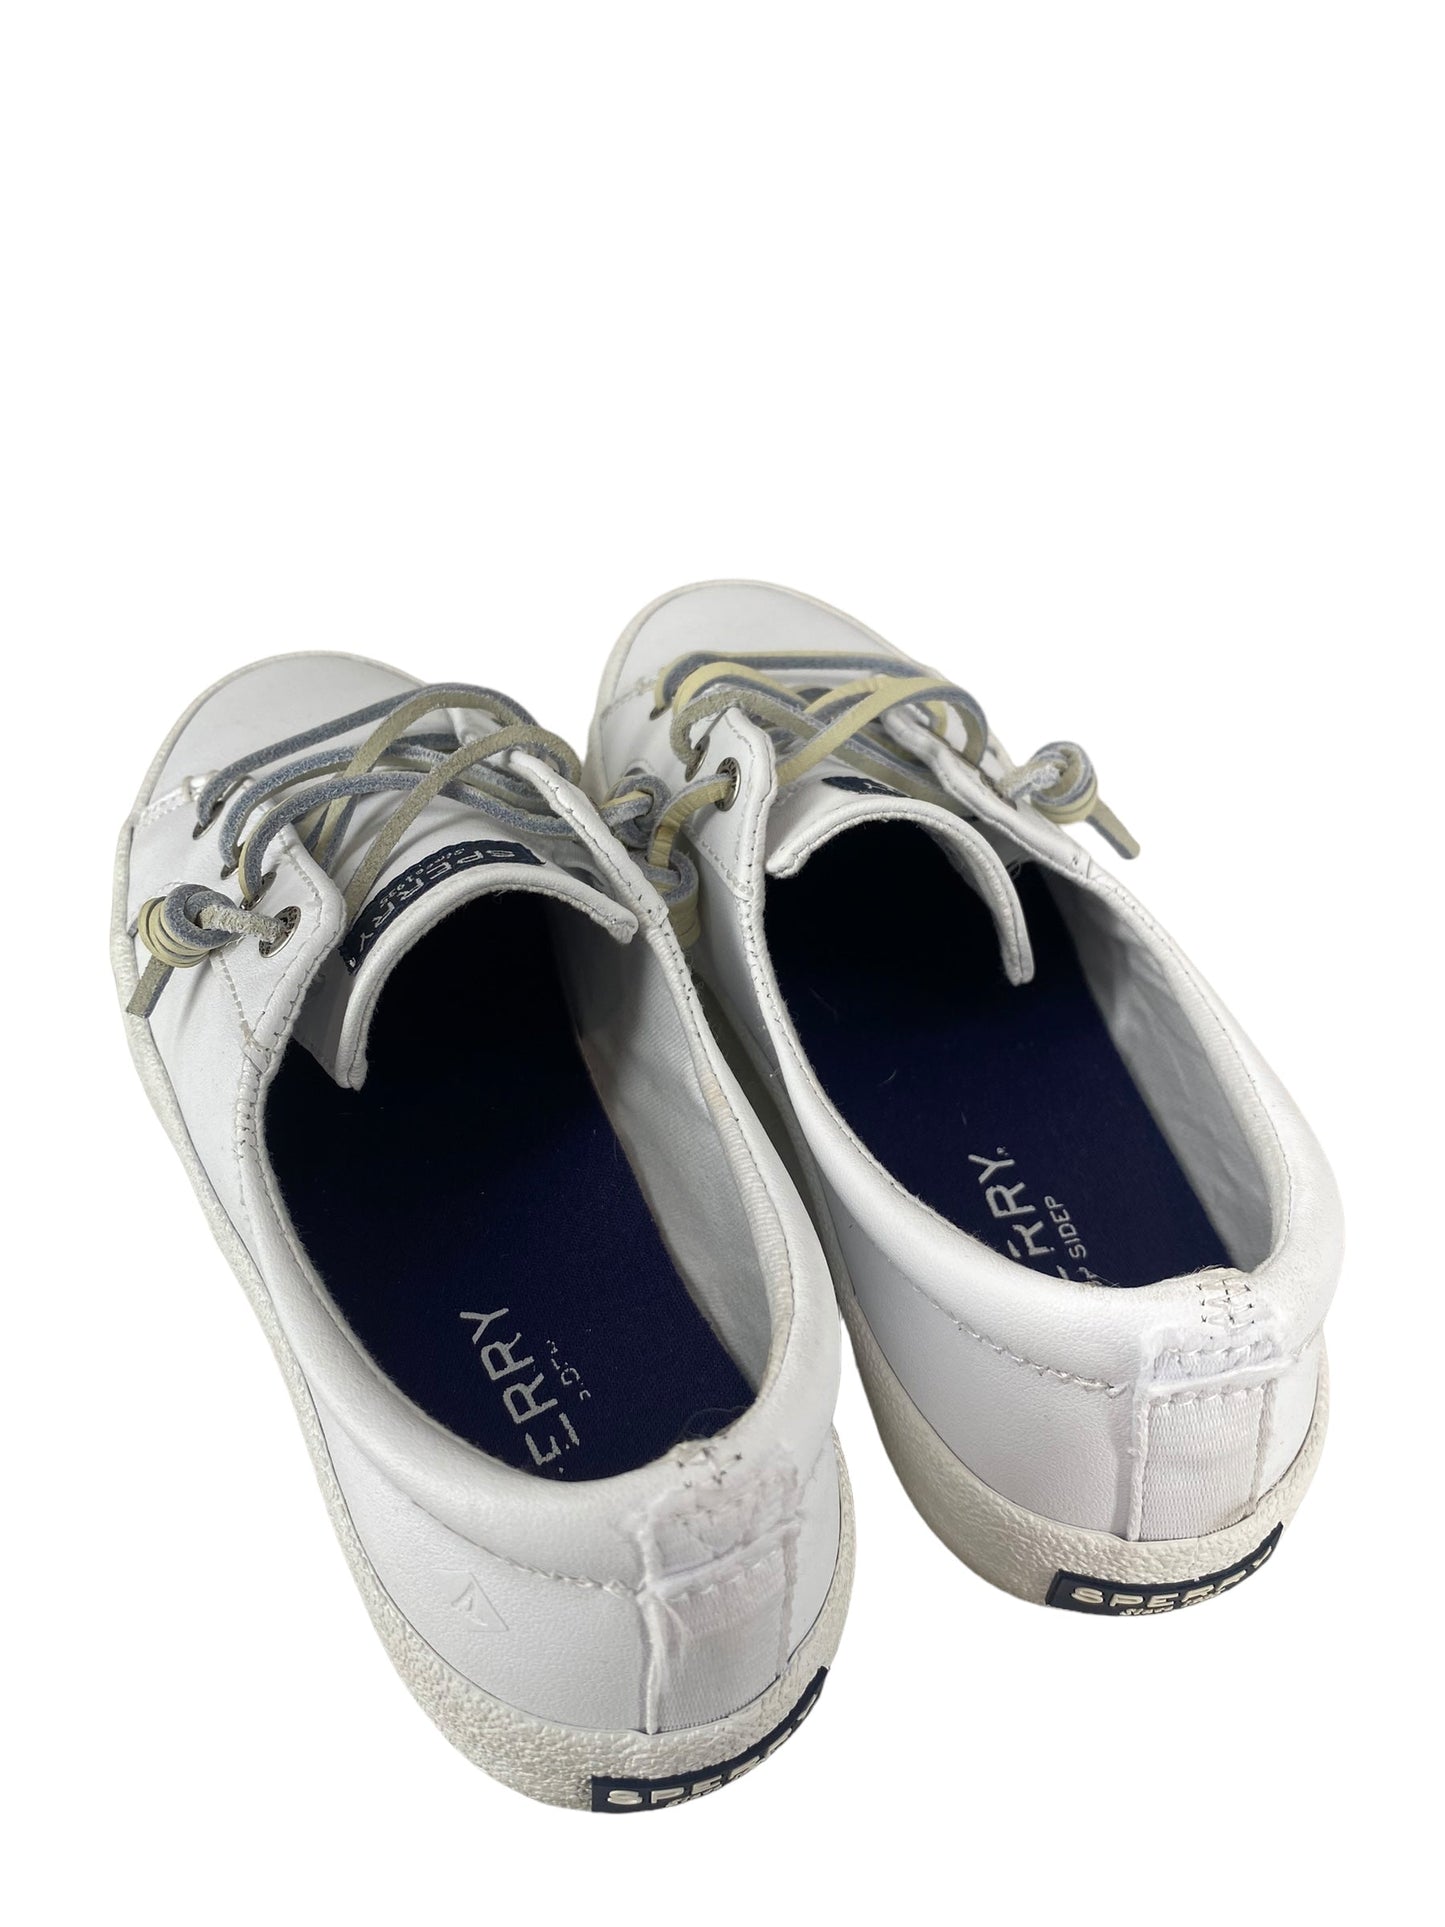 White Shoes Flats Sperry, Size 6.5